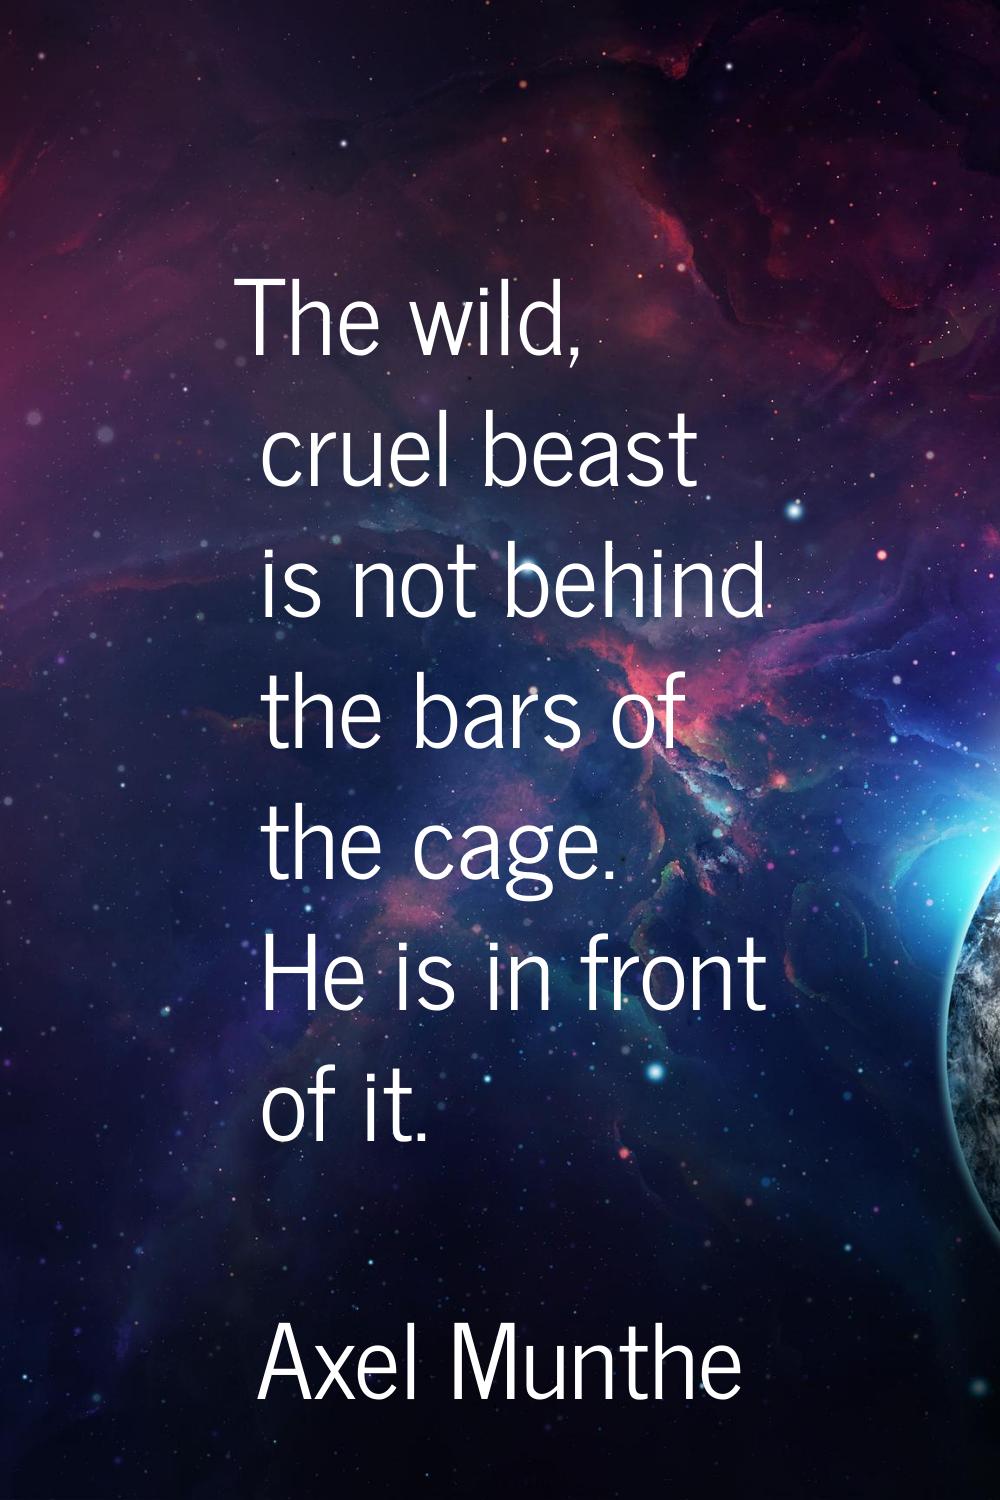 The wild, cruel beast is not behind the bars of the cage. He is in front of it.